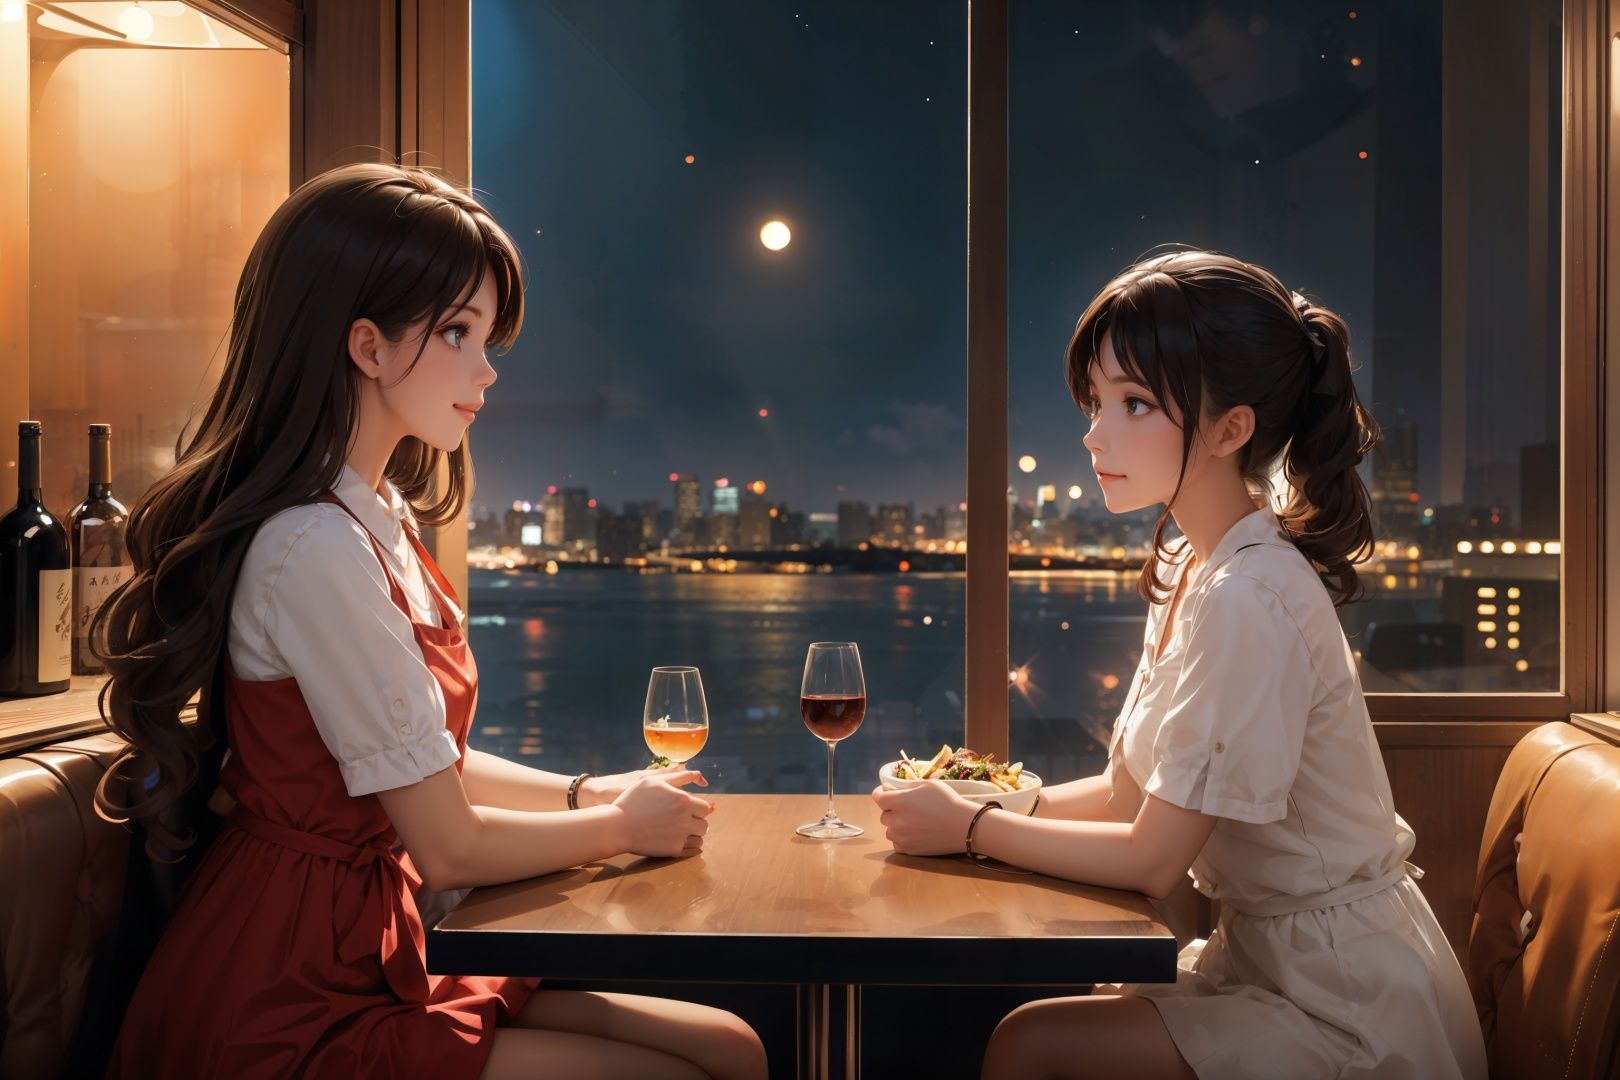 2girls,sitting,eating dinner,((close_shot)),delicate_features,pretty_face,smiling,pure,lovely,bar,bar counter,night,wine cabinet,a table for four,window,night view of the city in the high sky outside the window, <lora:Ricci_高空酒吧_v1.0:0.6>